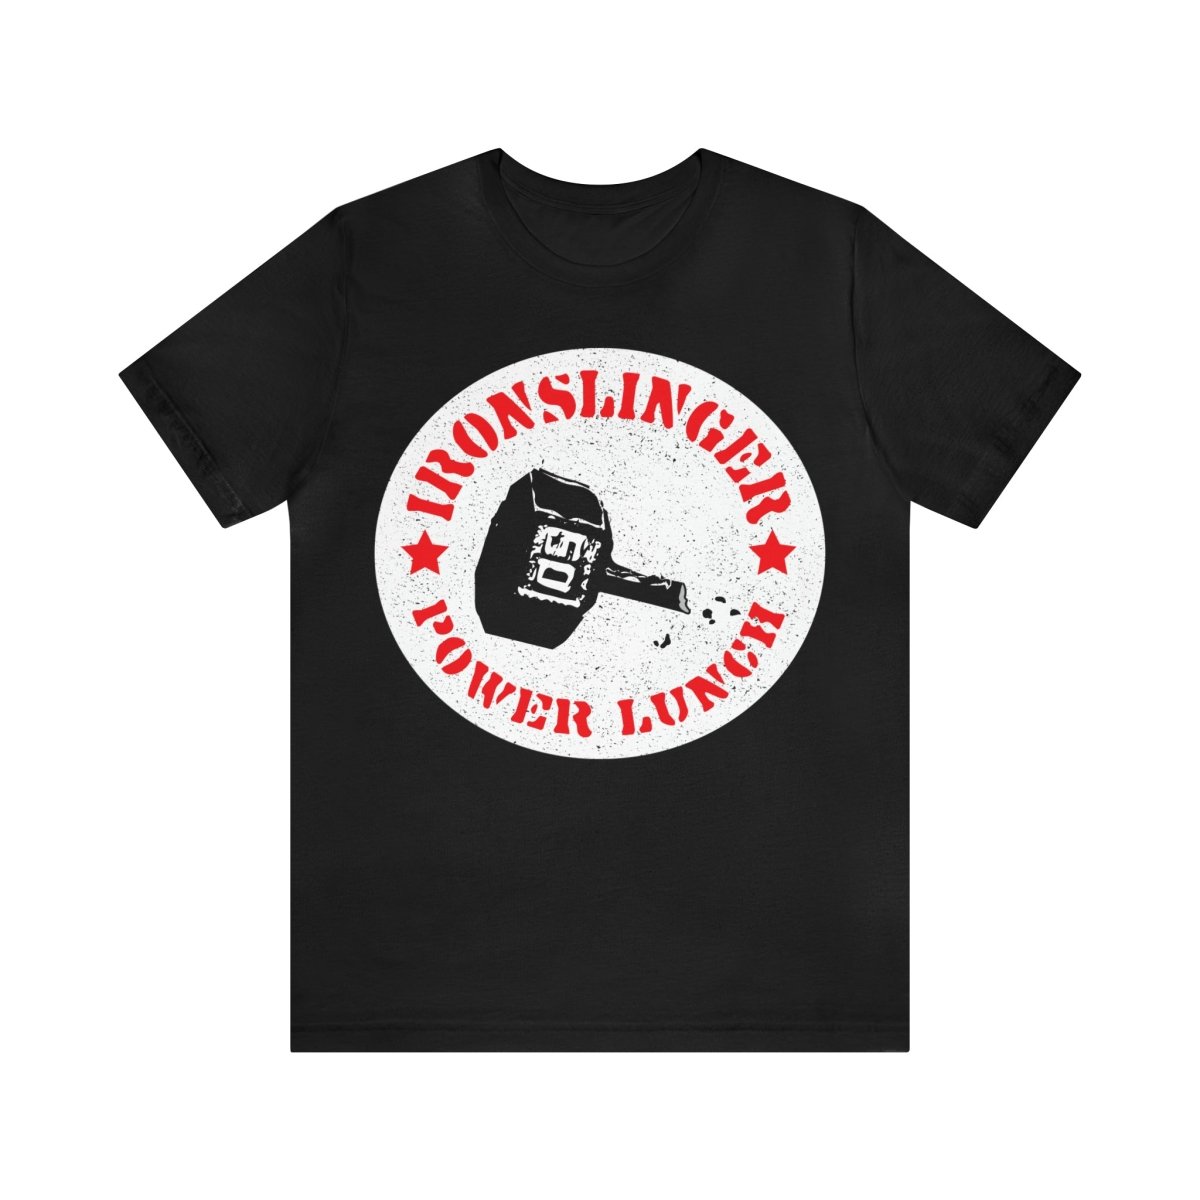 Ironslinger Power Lunch Premium T-Shirt, Weightlifter, Muscle Shirt, Powerlifting Gift, Strong Man Gift, Gym Clothes, Funny